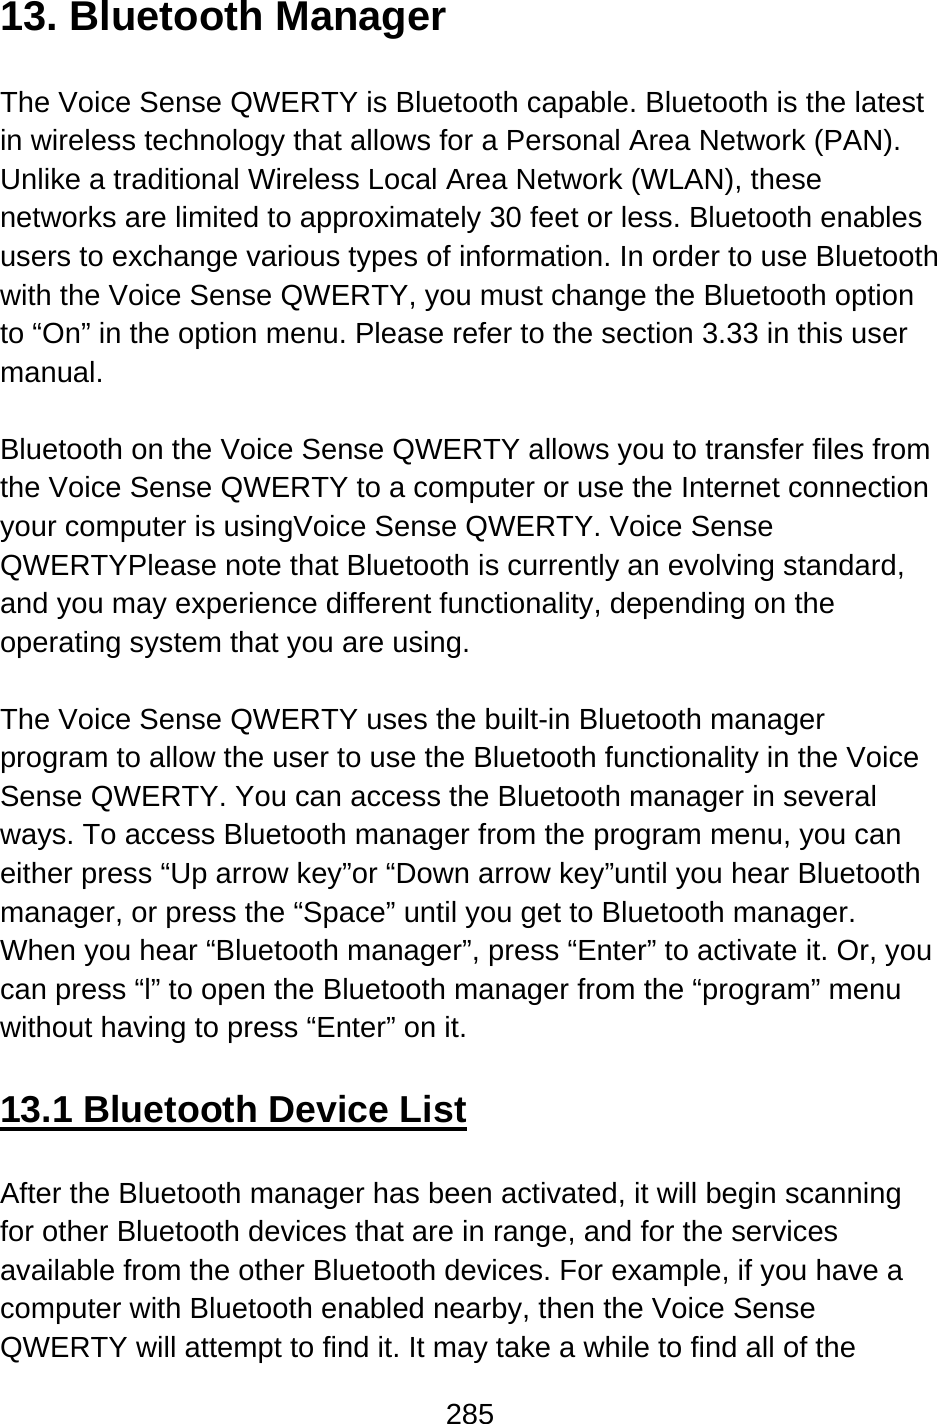 285  13. Bluetooth Manager  The Voice Sense QWERTY is Bluetooth capable. Bluetooth is the latest in wireless technology that allows for a Personal Area Network (PAN). Unlike a traditional Wireless Local Area Network (WLAN), these networks are limited to approximately 30 feet or less. Bluetooth enables users to exchange various types of information. In order to use Bluetooth with the Voice Sense QWERTY, you must change the Bluetooth option to “On” in the option menu. Please refer to the section 3.33 in this user manual.  Bluetooth on the Voice Sense QWERTY allows you to transfer files from the Voice Sense QWERTY to a computer or use the Internet connection your computer is usingVoice Sense QWERTY. Voice Sense QWERTYPlease note that Bluetooth is currently an evolving standard, and you may experience different functionality, depending on the operating system that you are using.  The Voice Sense QWERTY uses the built-in Bluetooth manager program to allow the user to use the Bluetooth functionality in the Voice Sense QWERTY. You can access the Bluetooth manager in several ways. To access Bluetooth manager from the program menu, you can either press “Up arrow key”or “Down arrow key”until you hear Bluetooth manager, or press the “Space” until you get to Bluetooth manager. When you hear “Bluetooth manager”, press “Enter” to activate it. Or, you can press “l” to open the Bluetooth manager from the “program” menu without having to press “Enter” on it.  13.1 Bluetooth Device List  After the Bluetooth manager has been activated, it will begin scanning for other Bluetooth devices that are in range, and for the services available from the other Bluetooth devices. For example, if you have a computer with Bluetooth enabled nearby, then the Voice Sense QWERTY will attempt to find it. It may take a while to find all of the 